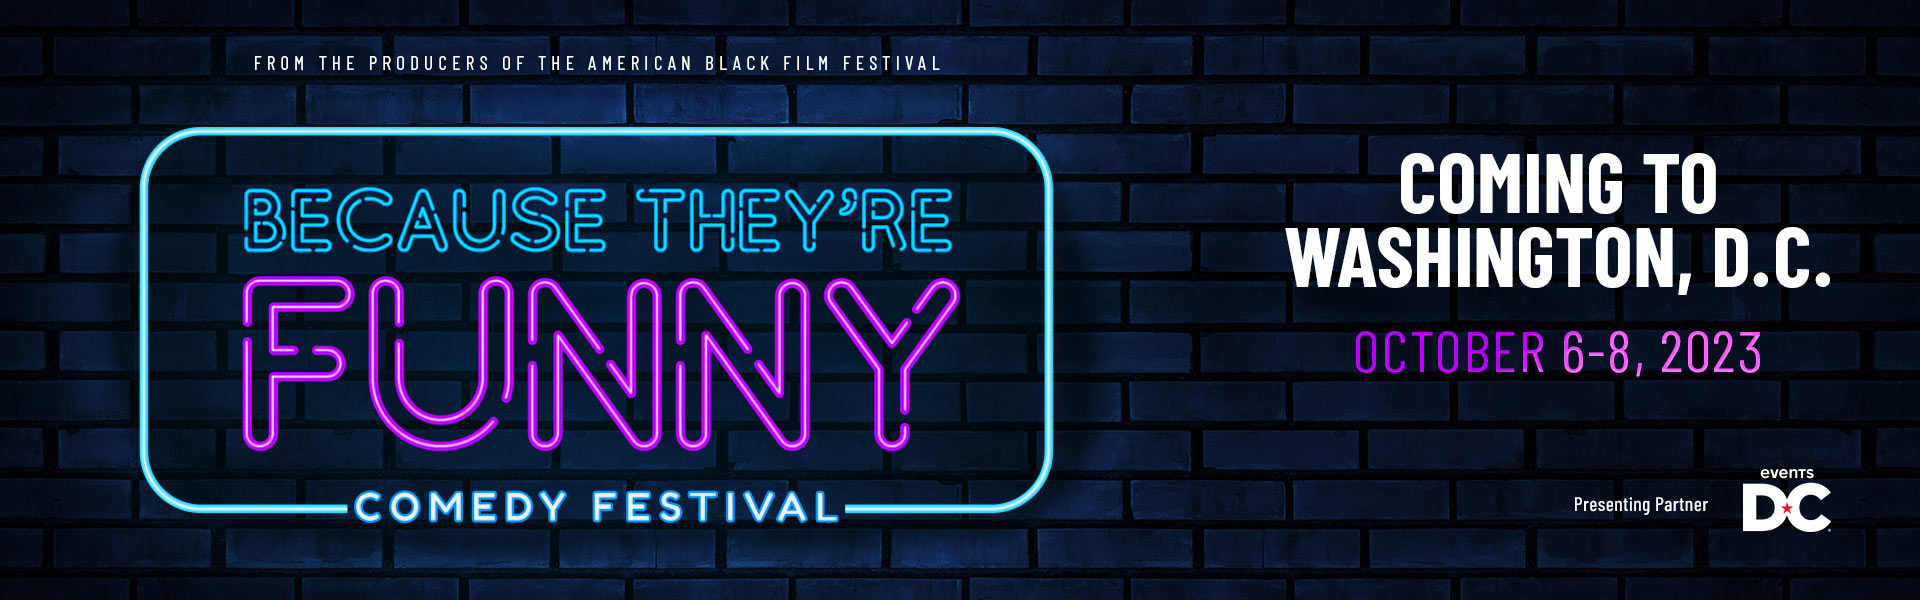 From the Producers of the American Black Film Festival: Because They're Funny Comedy Festival - Coming to Washington, D.C., October 6-8, 2023 - Presenting Partner, Events DC